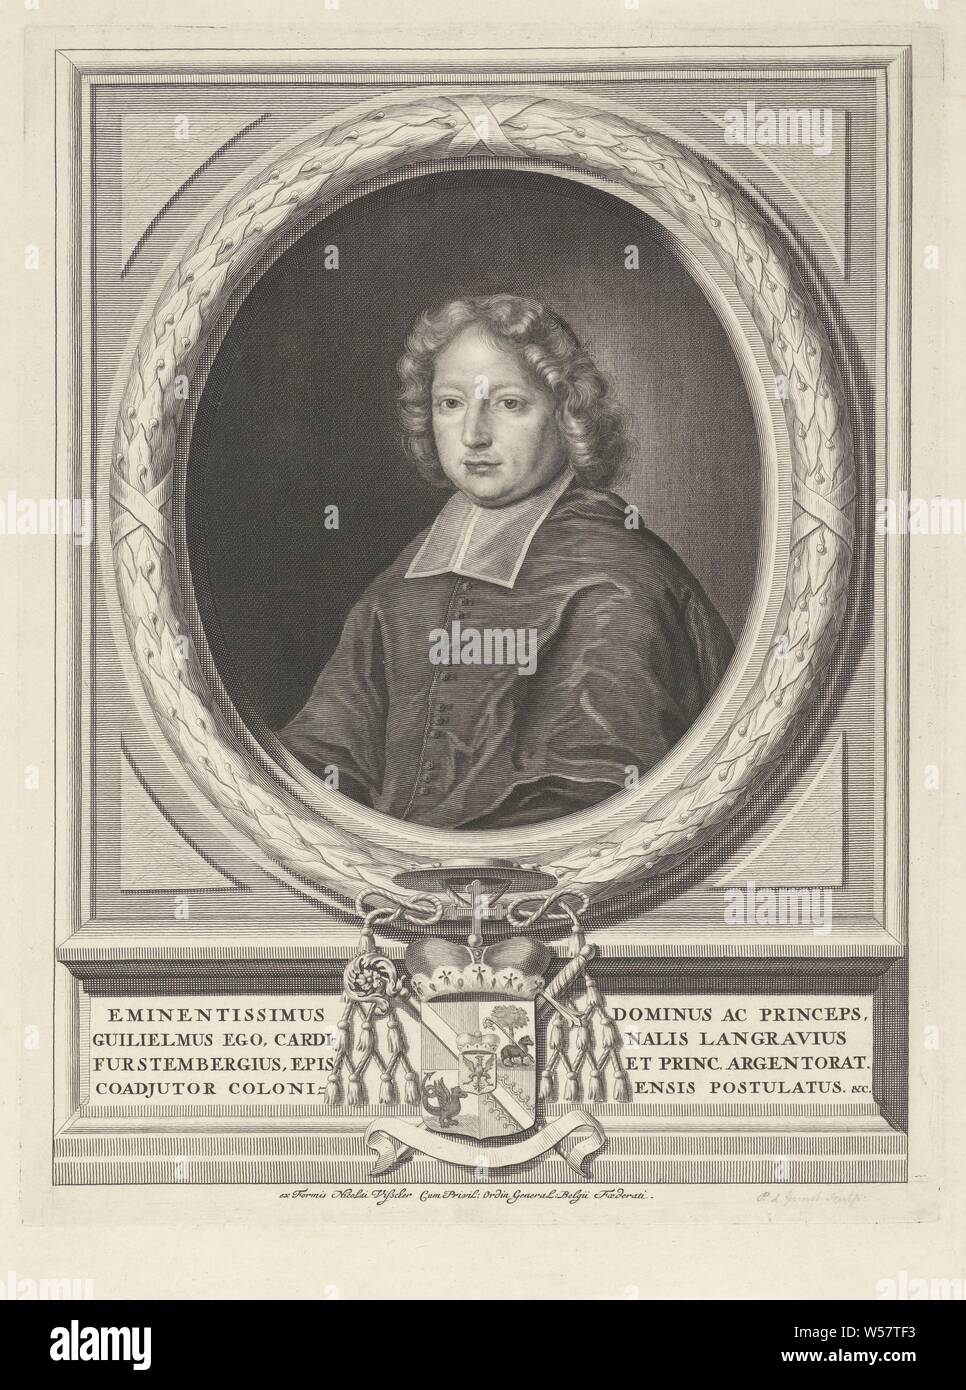 Portrait of Bishop Wilhelm Egon von Fürstenberg-Heiligenberg, Wilhelm Egon von Fürstenberg-Heiligenberg, Bishop of Metz and Strasbourg and Archbishop of Cologne. Below the portrait are coat of arms, Pieter van Gunst (mentioned on object), Amsterdam, 1688 - 1731, paper, engraving, w 293 mm × h 379 mm Stock Photo